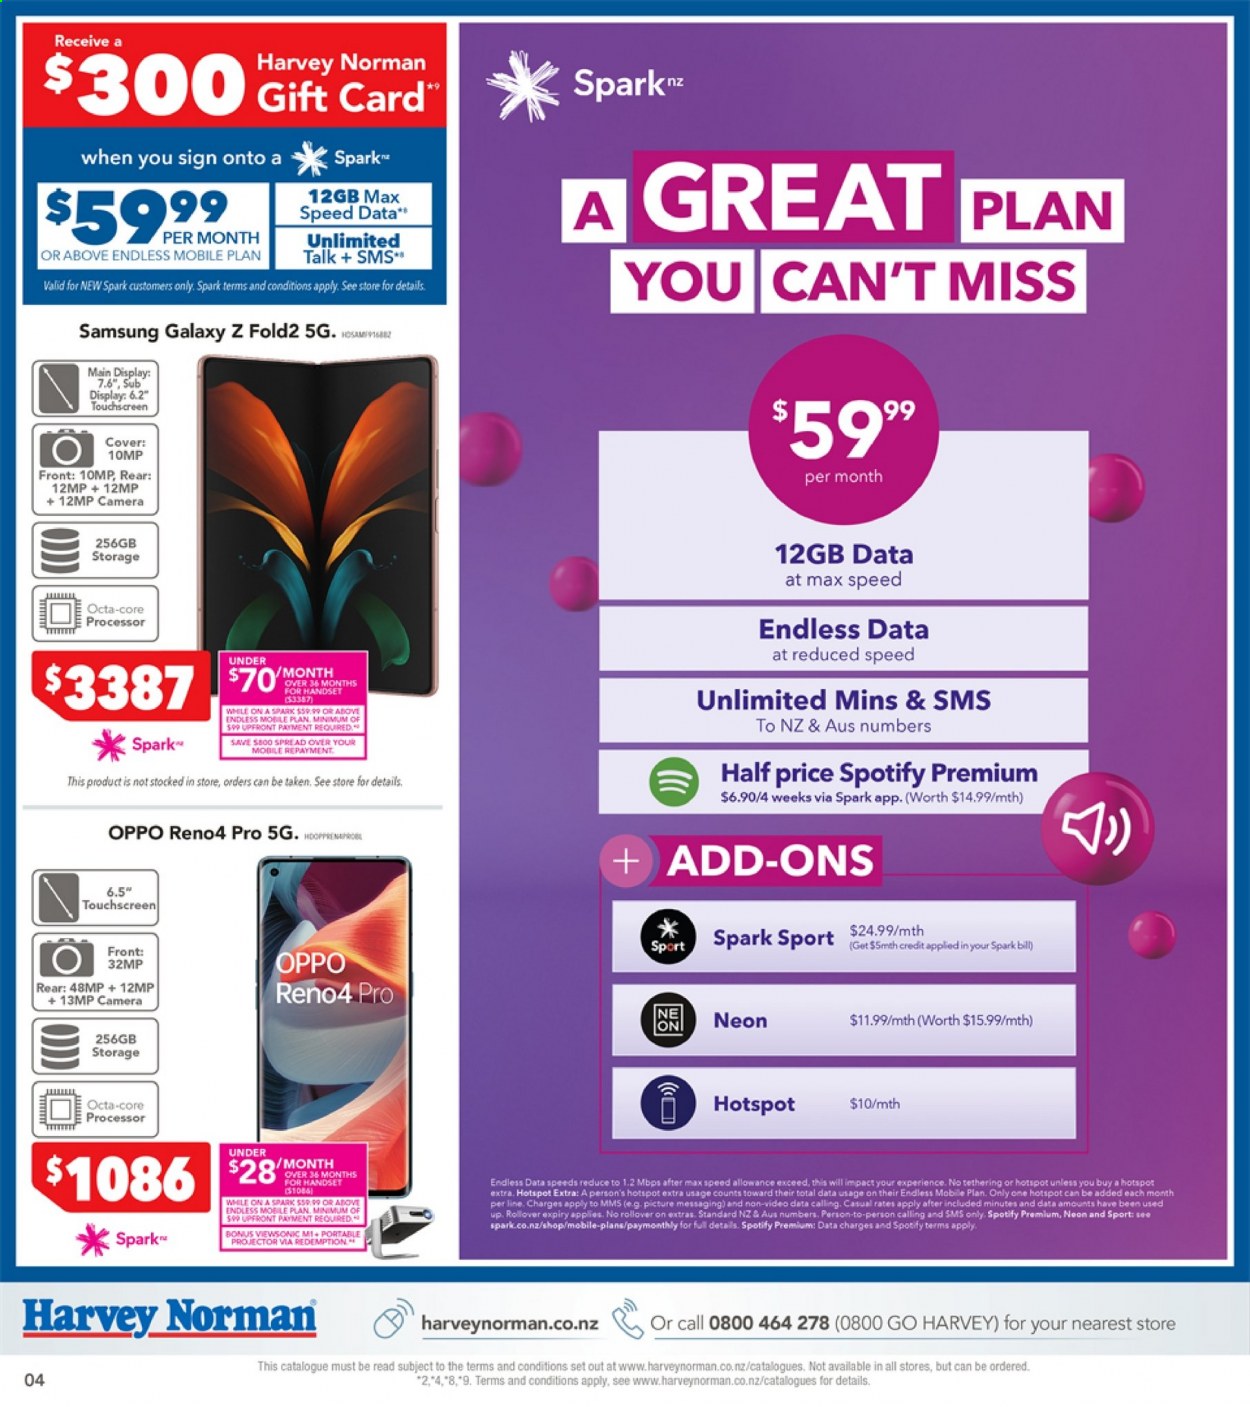 thumbnail - Harvey Norman mailer - 06.07.2021 - 19.07.2021 - Sales products - Samsung Galaxy, Samsung, Oppo, Samsung Galaxy Z, Samsung Galaxy Z Fold2, camera, projector. Page 4.